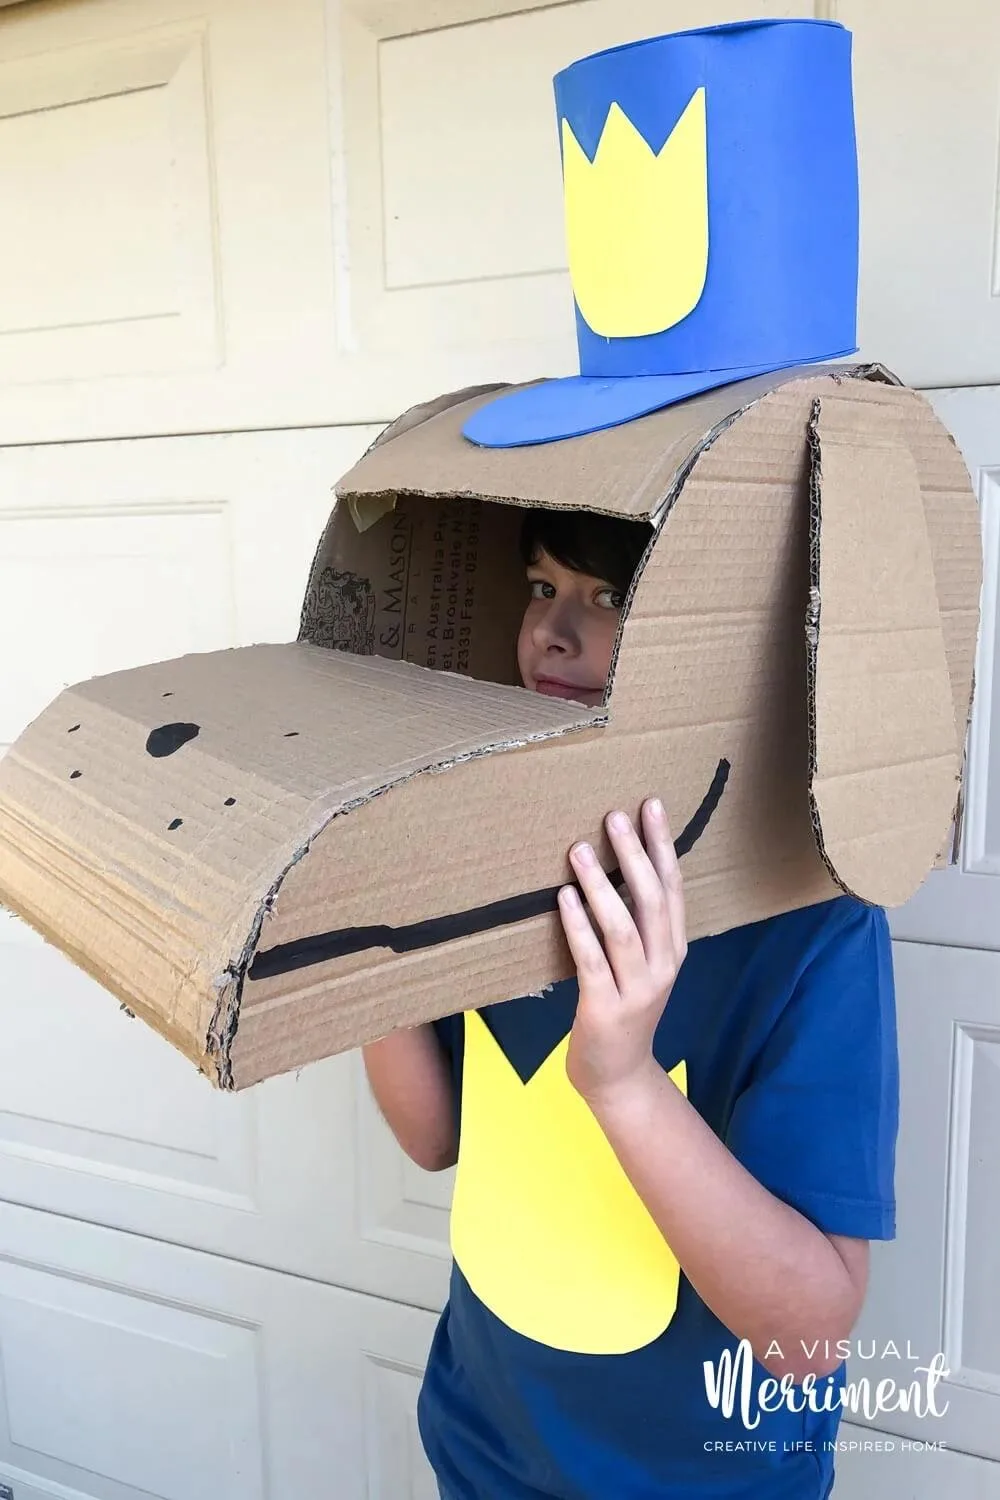 Homemade dog man costume made from cardboard boxes.